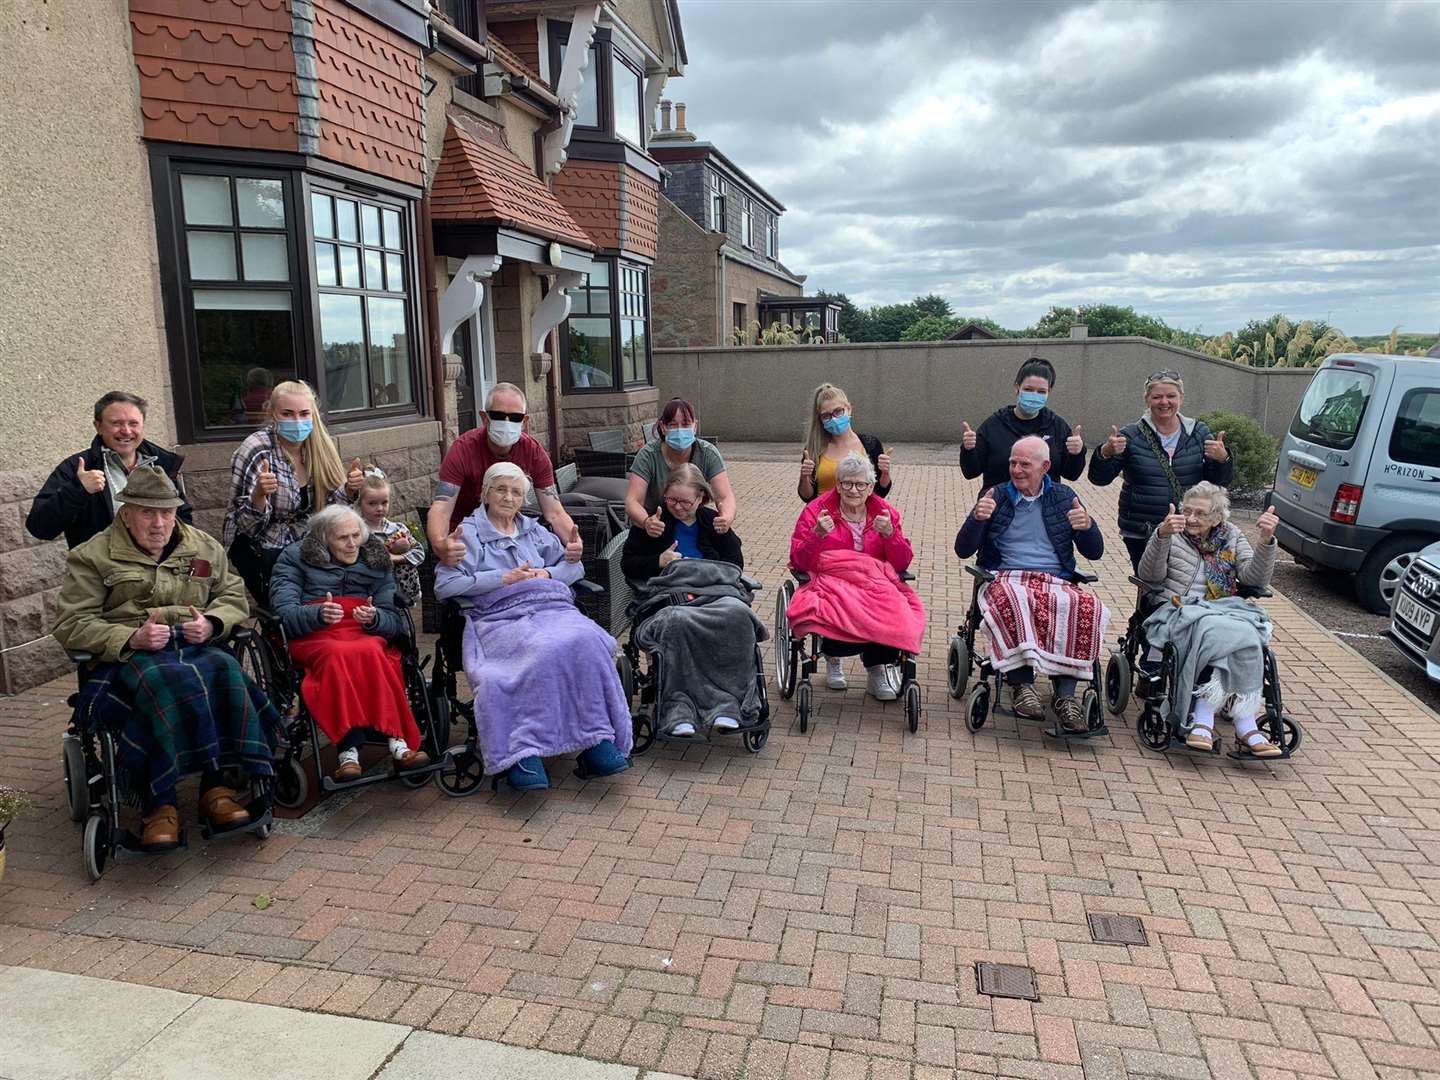 Residents and staff from the care home took part in the sponsored walk.